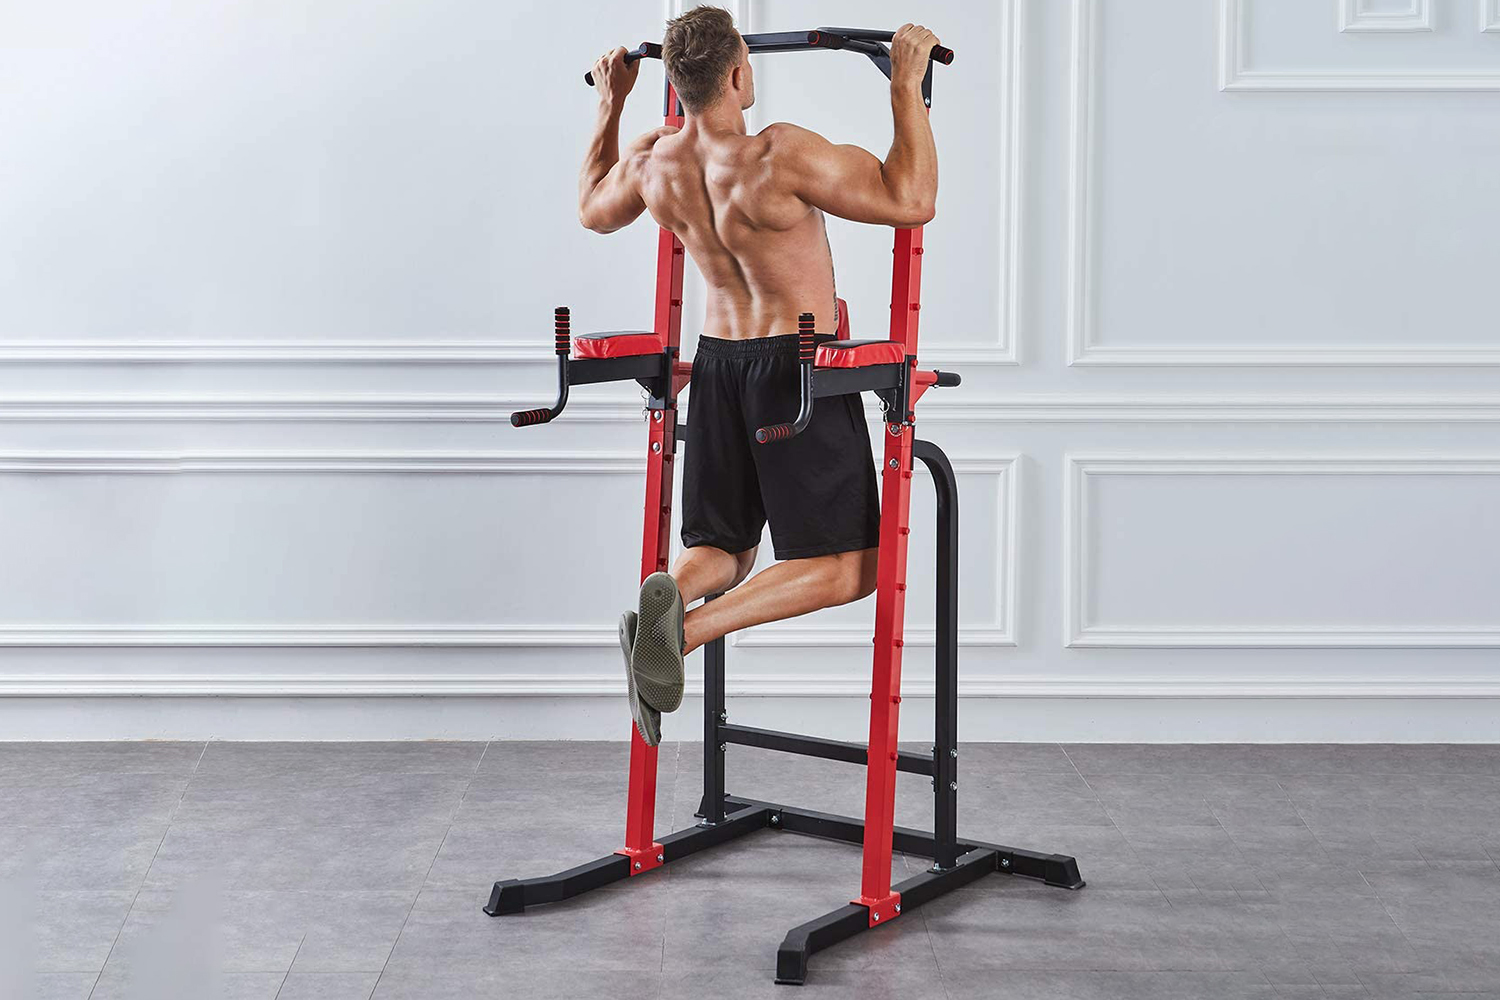 Working out at a gym is overrated: The best at-home workout equipment for  men - The Manual